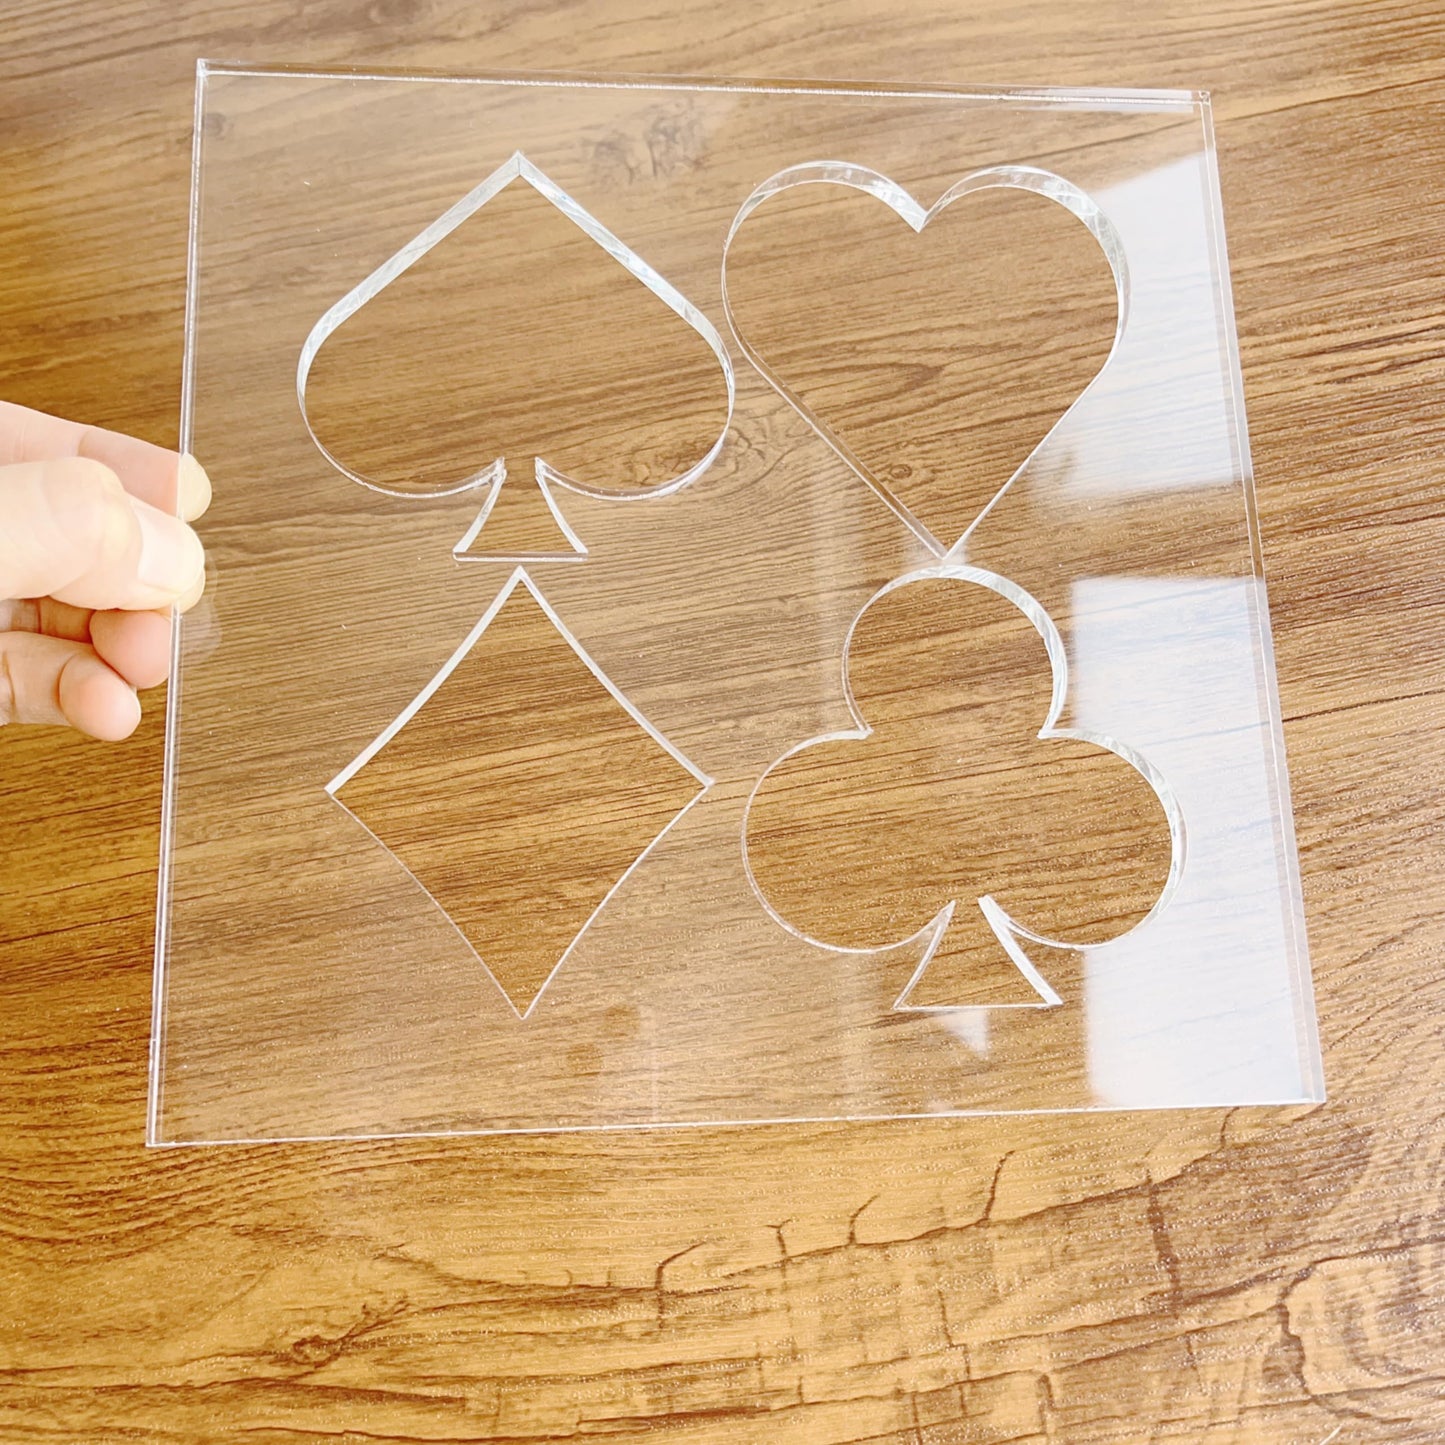 Card Suits Router Template, Router Inlay Template, Router Jig, Woodworking Template, Craft Template